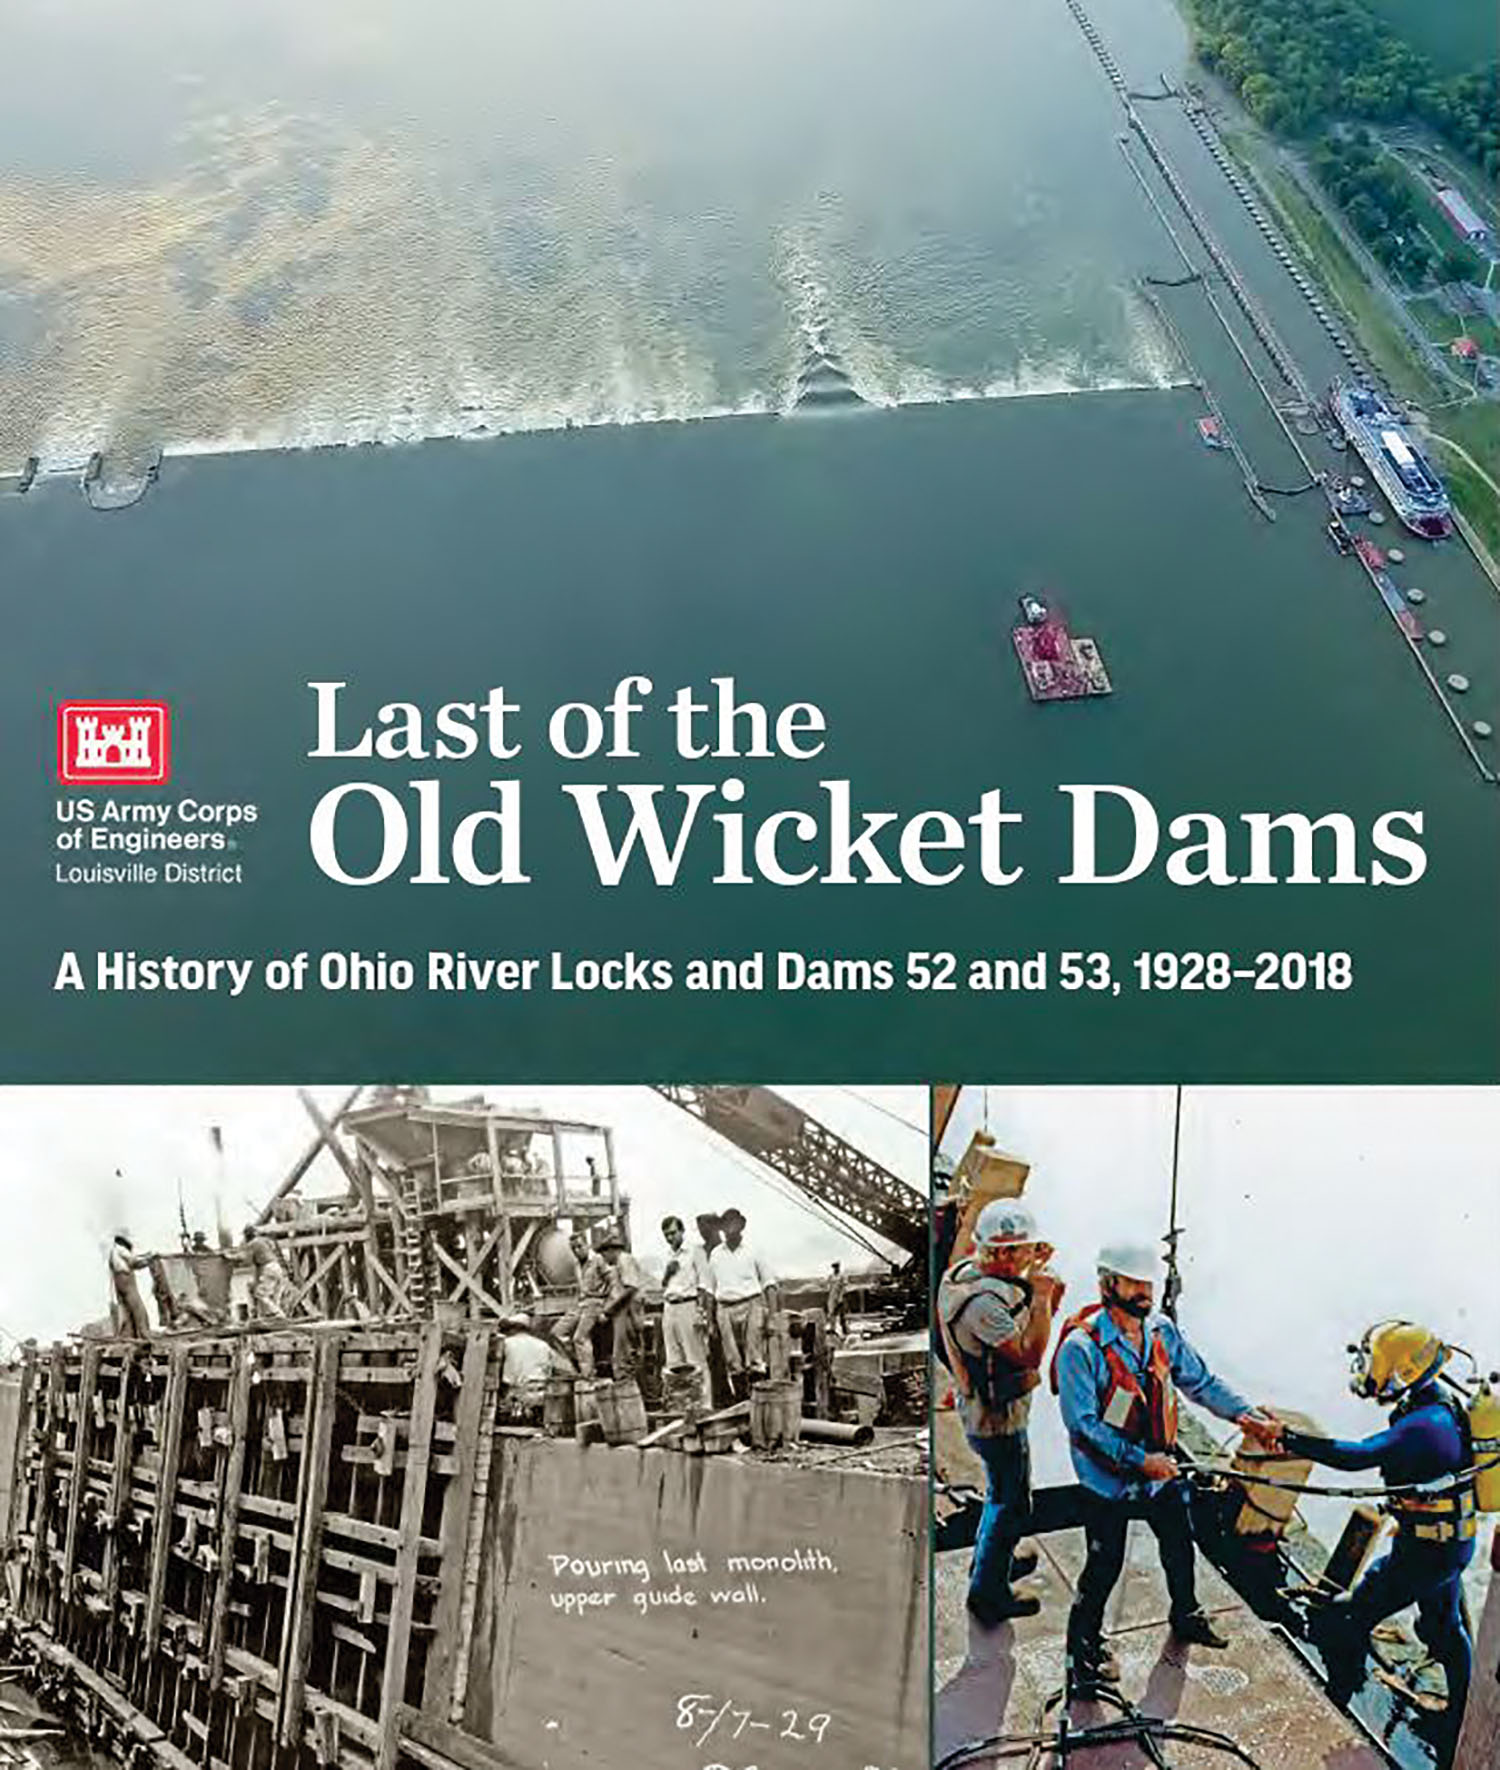 “Last of the Old Wicket Dams: A History of Ohio River Locks and Dams 52 and 53, 1928-2018” details the history of the wicket dams along the lower Ohio River that were replaced when Olmsted Locks and Dam came online in 2018. (Photo courtesy of the Louisville Engineer District)